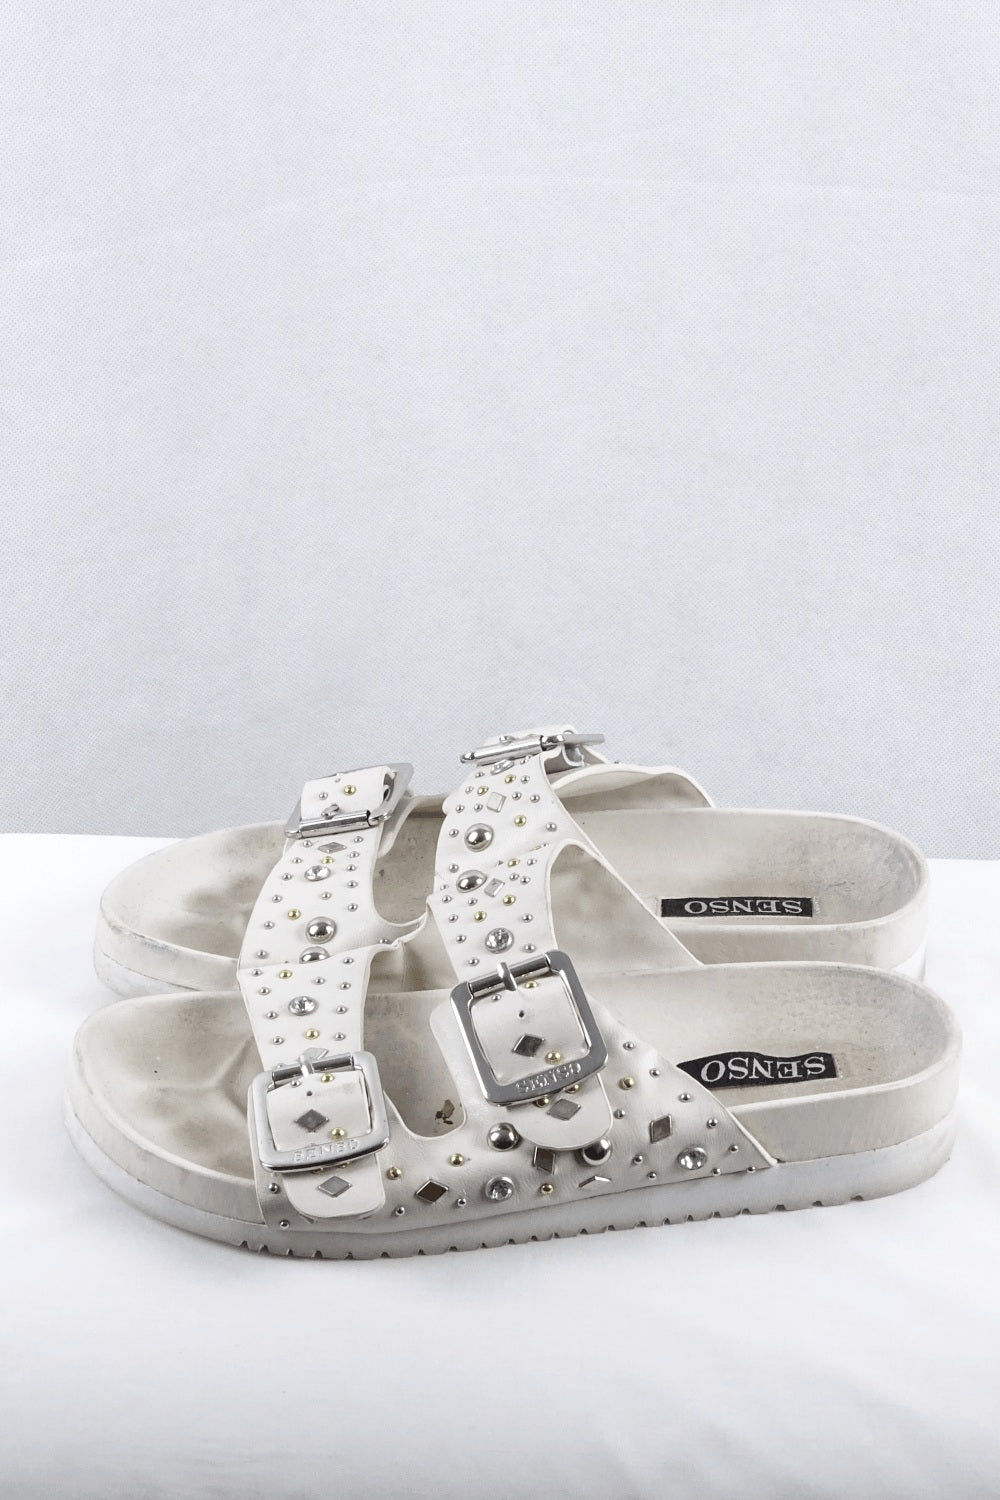 Senso White Sandals With Gem Stones 42